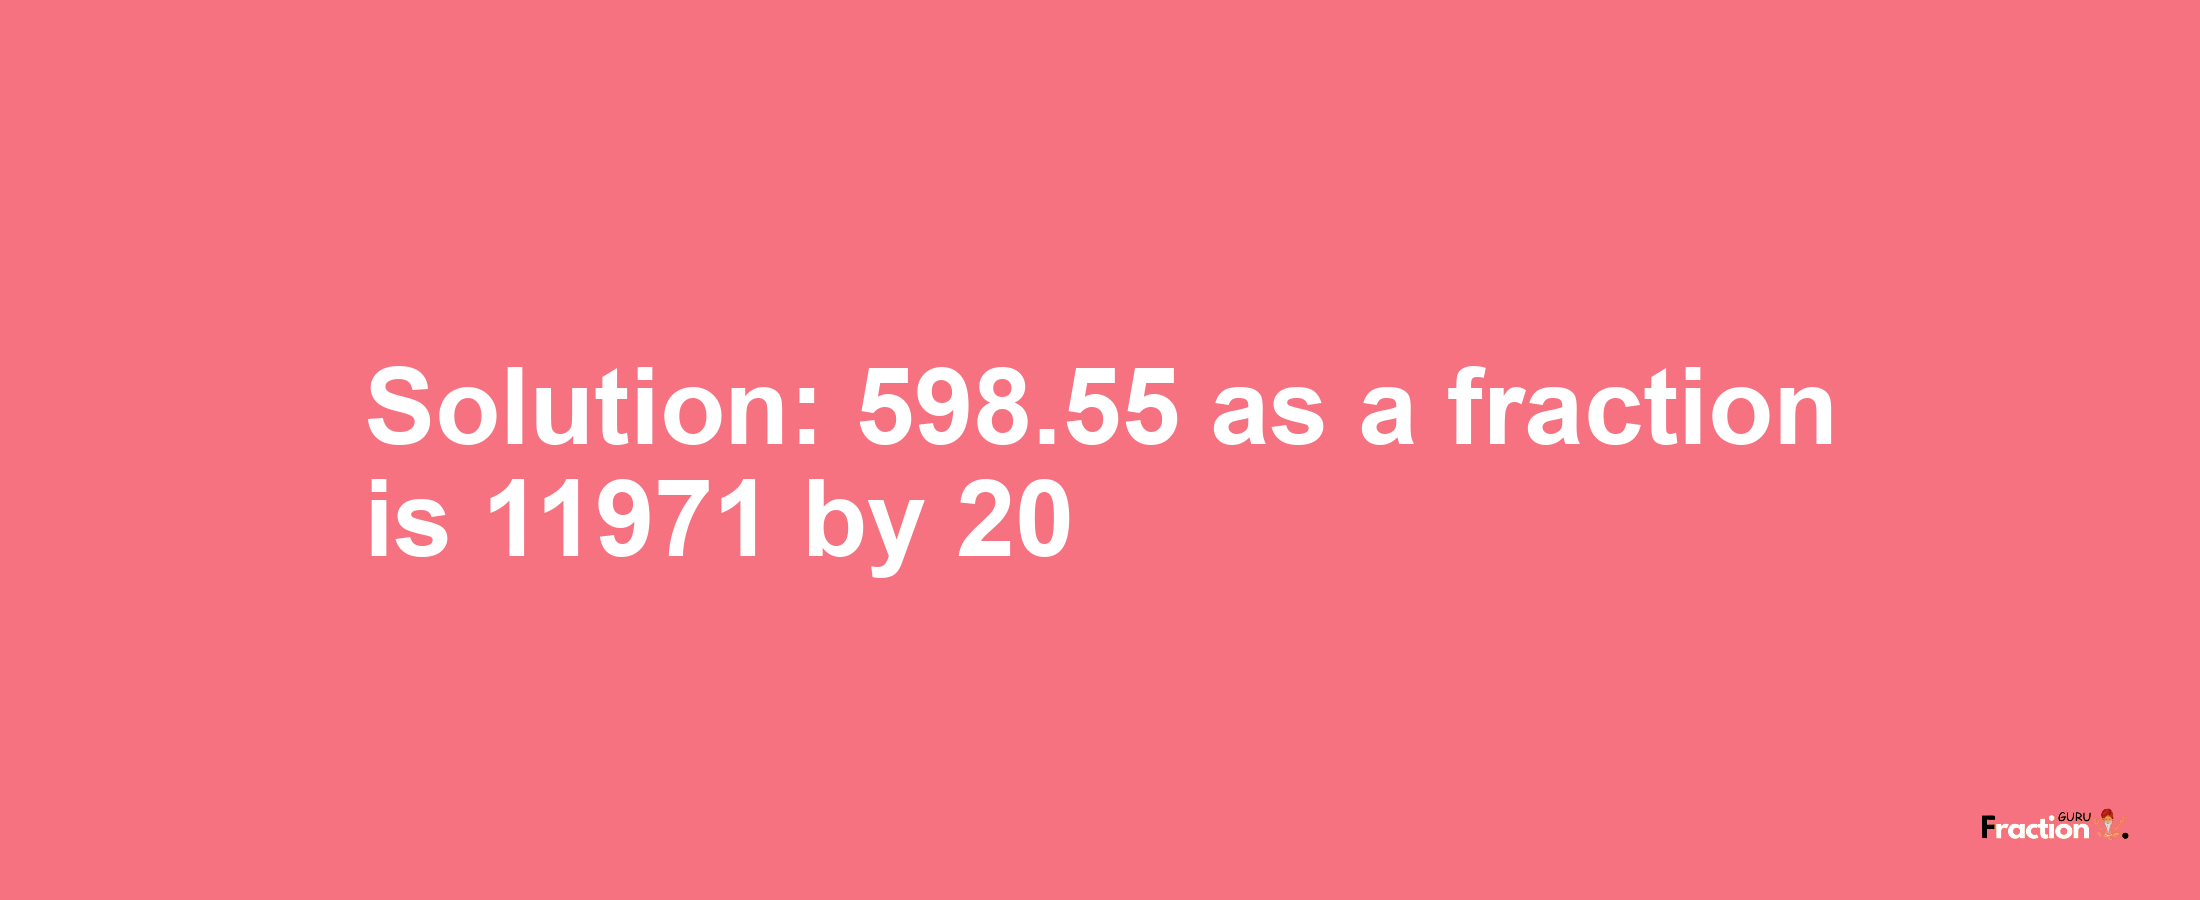 Solution:598.55 as a fraction is 11971/20